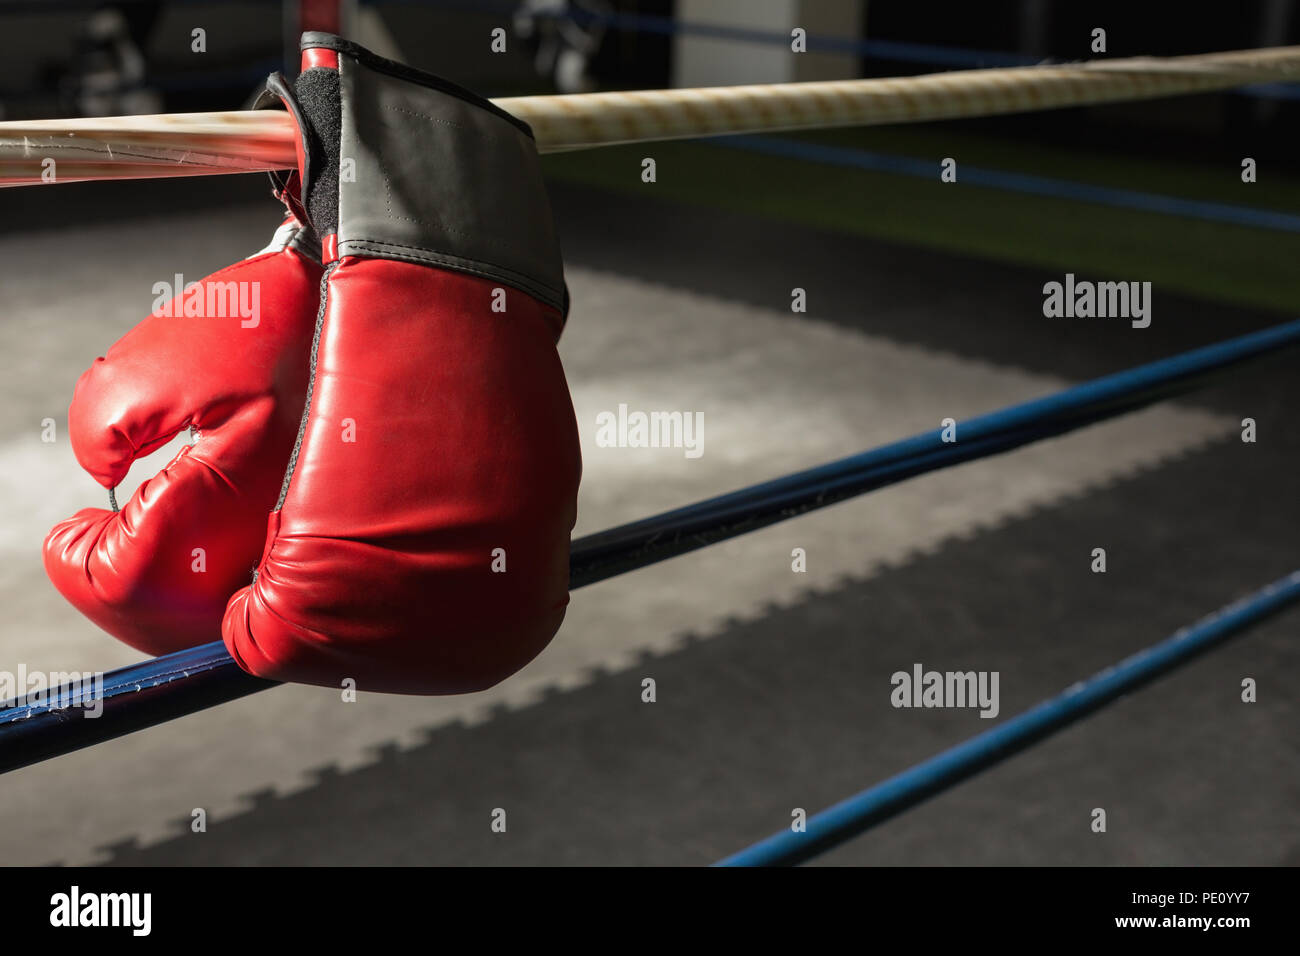 Boxing gloves on the boxing ring Stock Photo